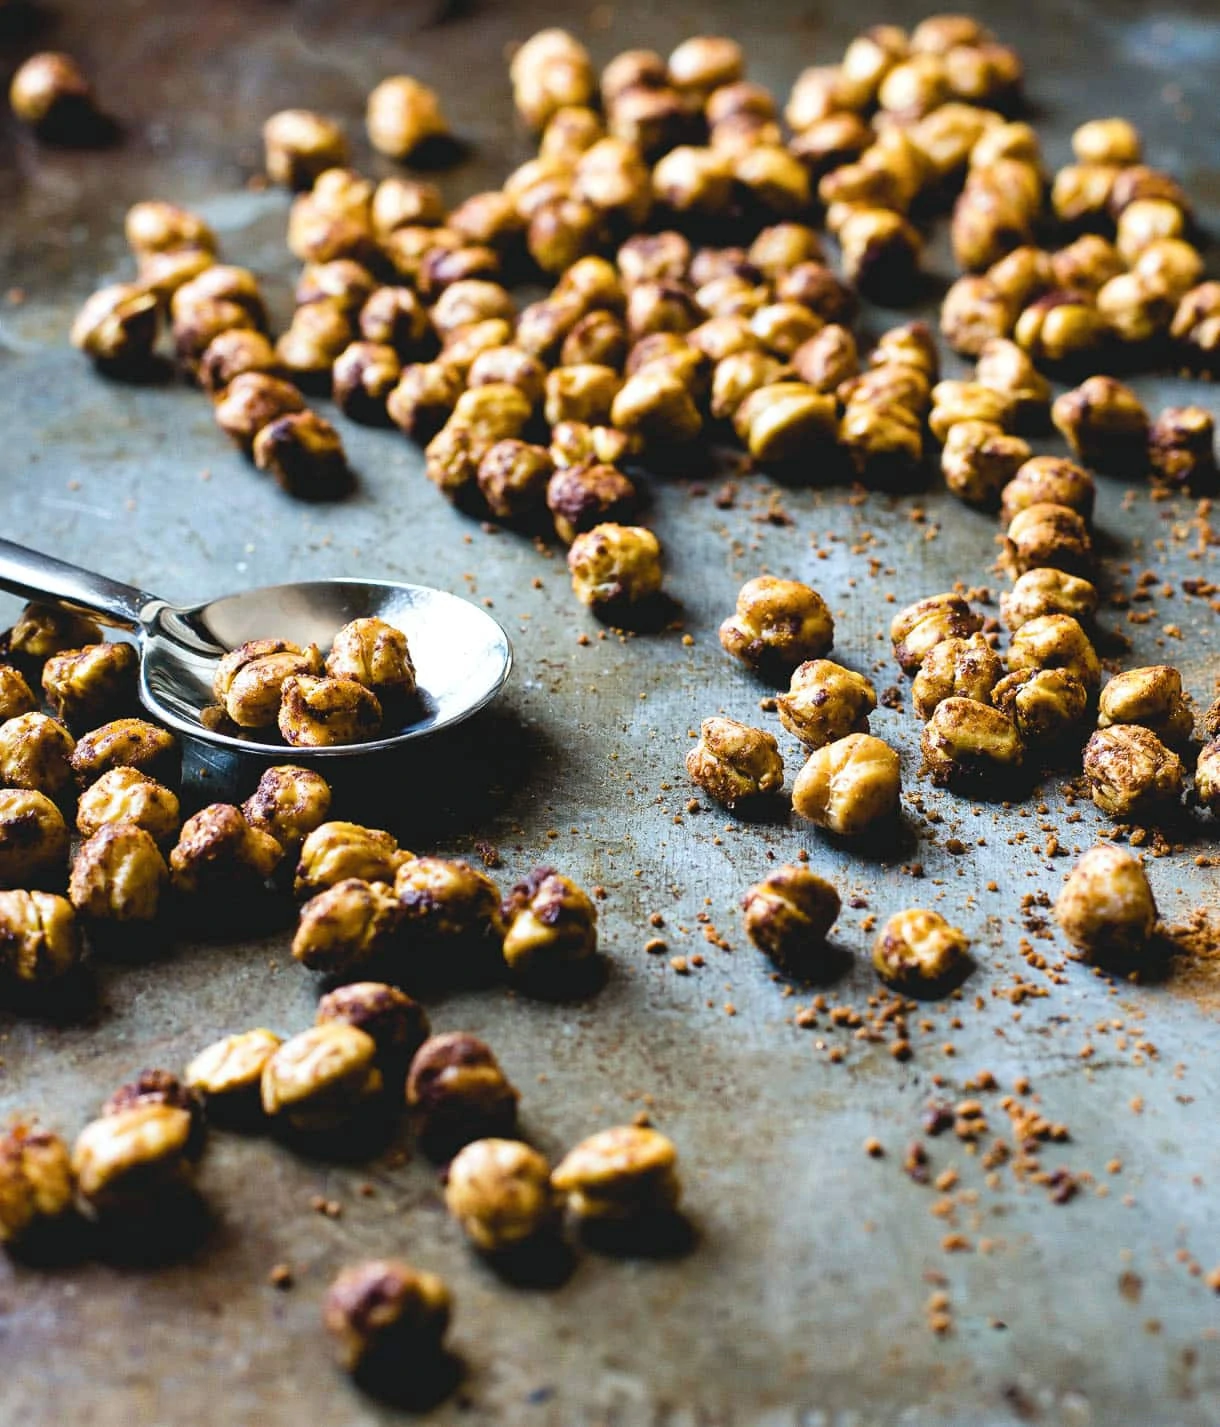 Maple Cinnamon Roasted Chickpeas + 3 tips to making them crispy & crunchy